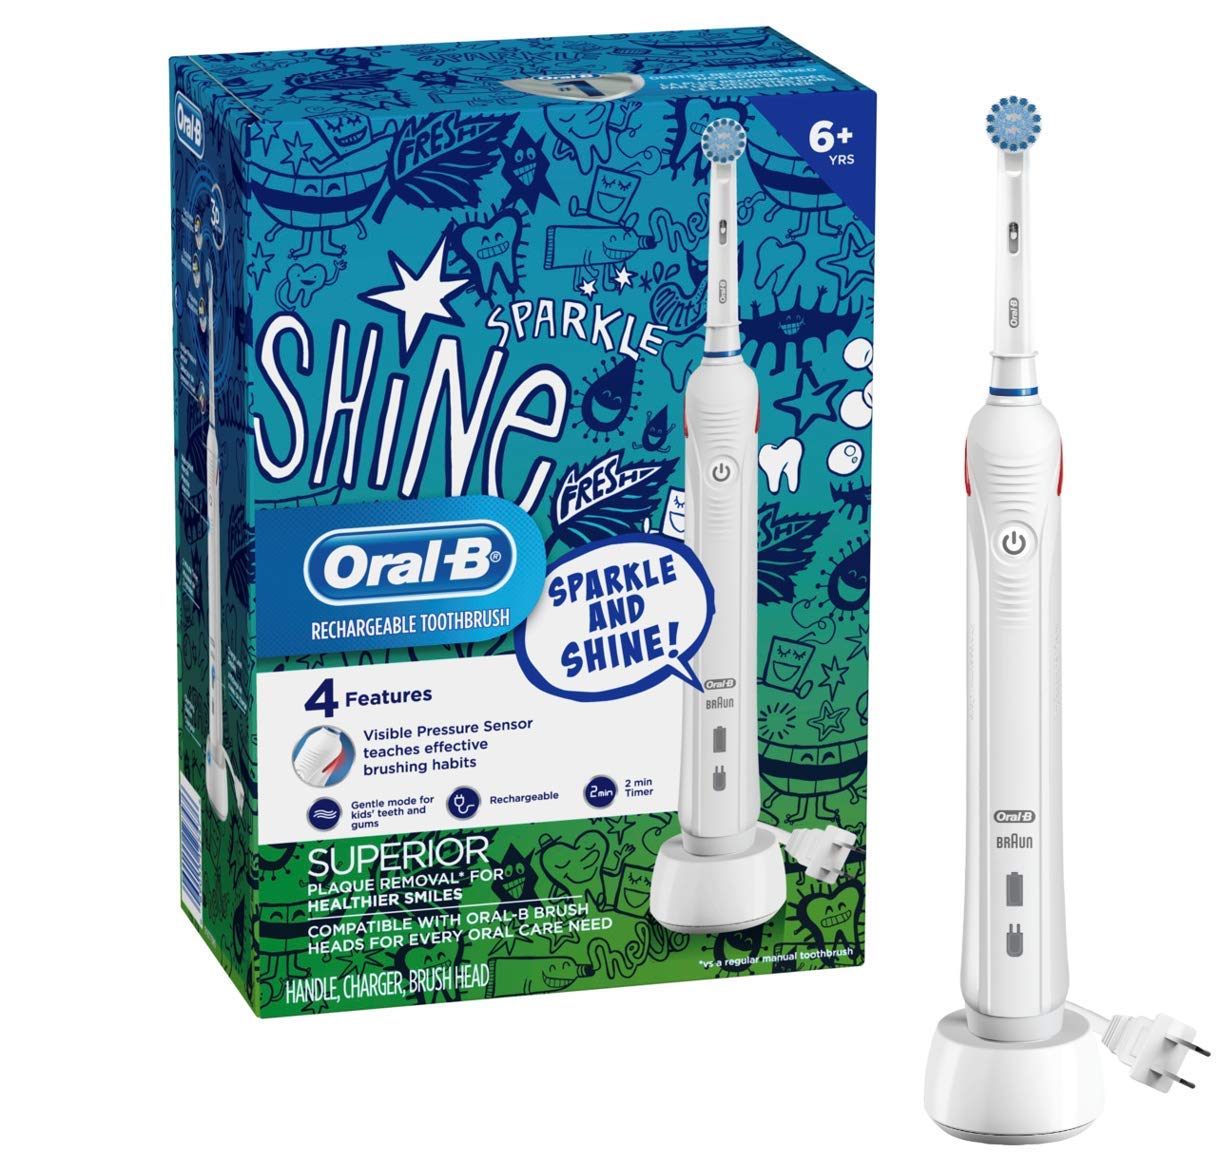 Oral-B Sparkle and Shine Kids Electric Toothbrush